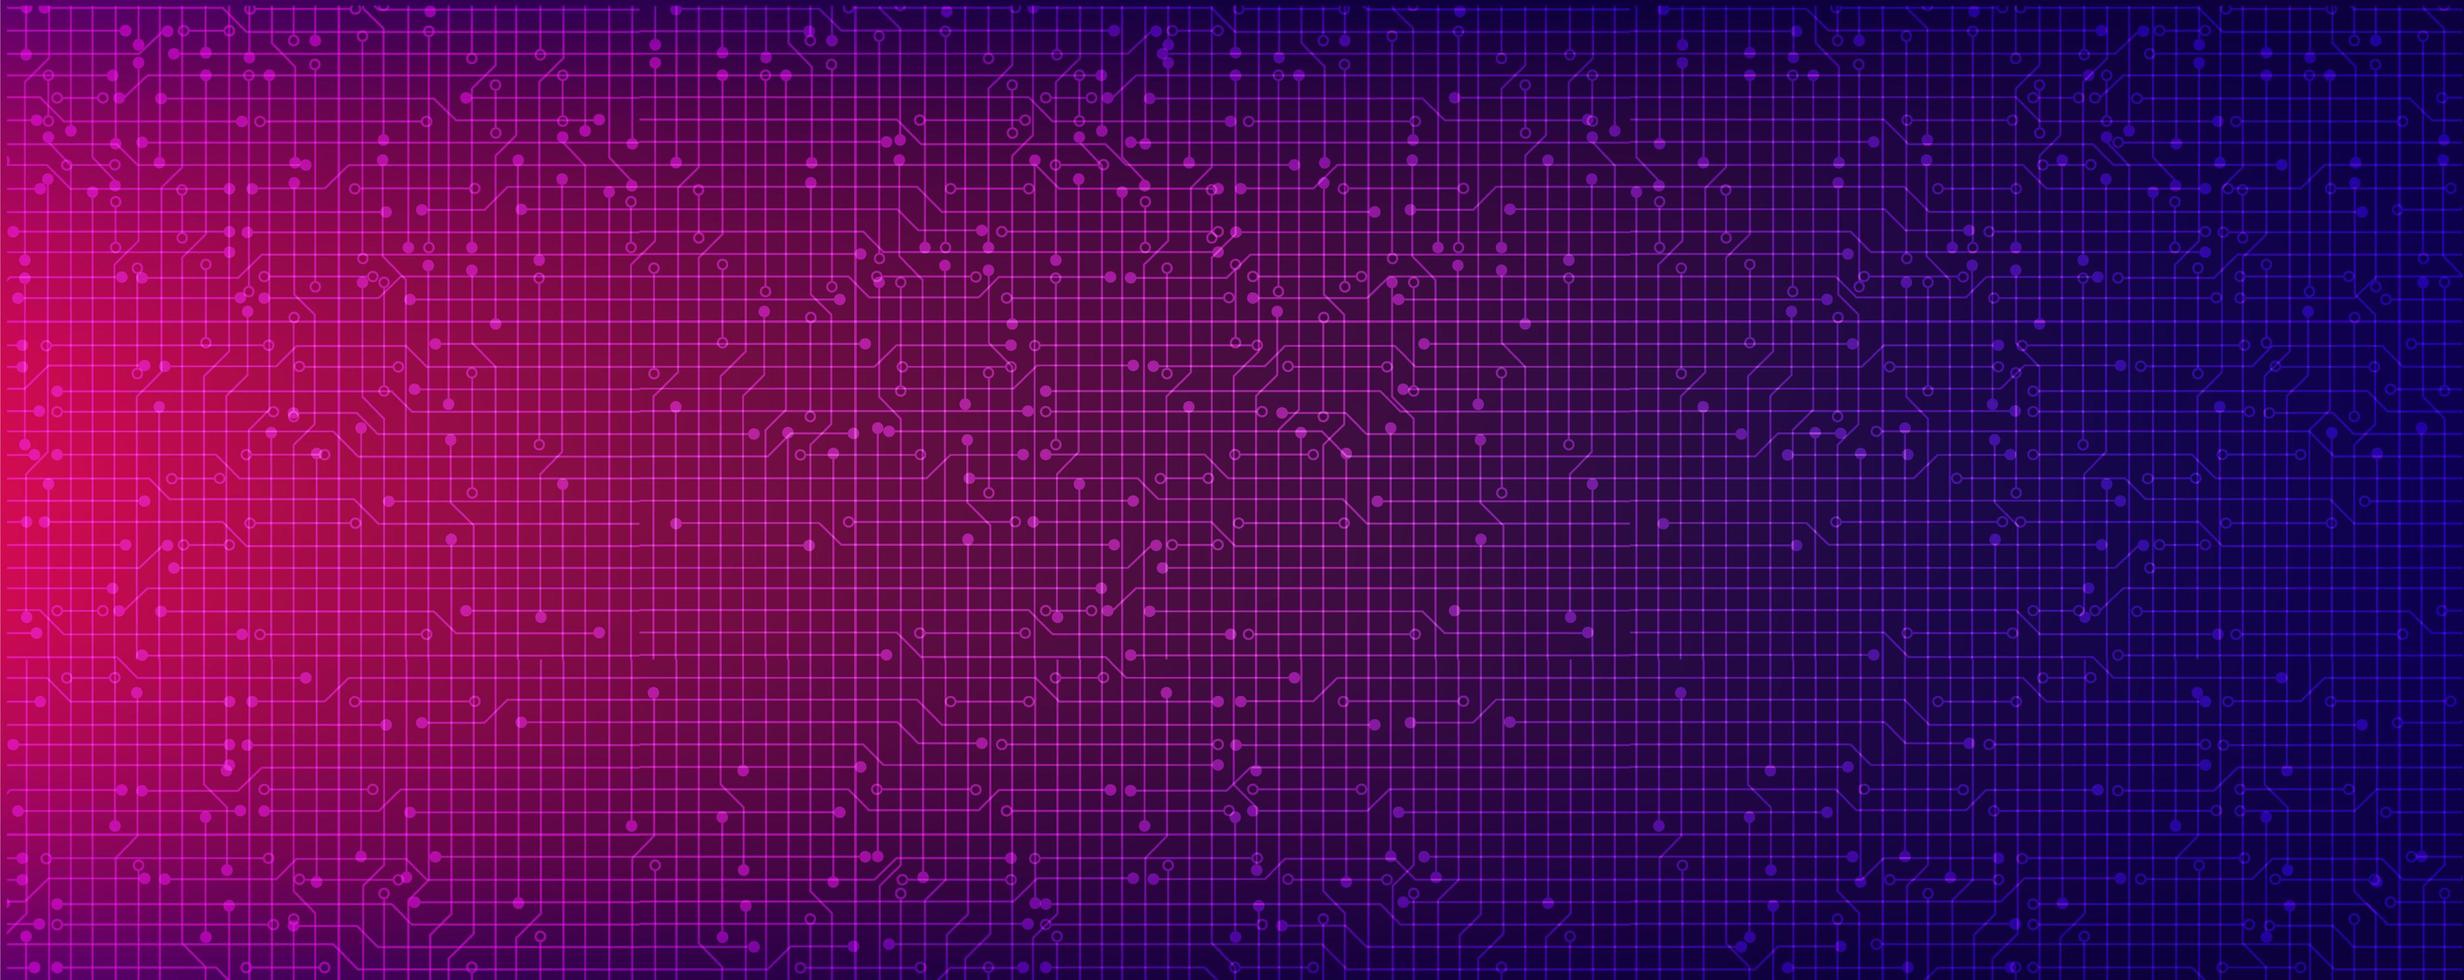 Light Purple Circuit Microchip Technology on Future Background,Hi-tech Digital and Communication Concept design,Free Space For text in put,Vector illustration. vector